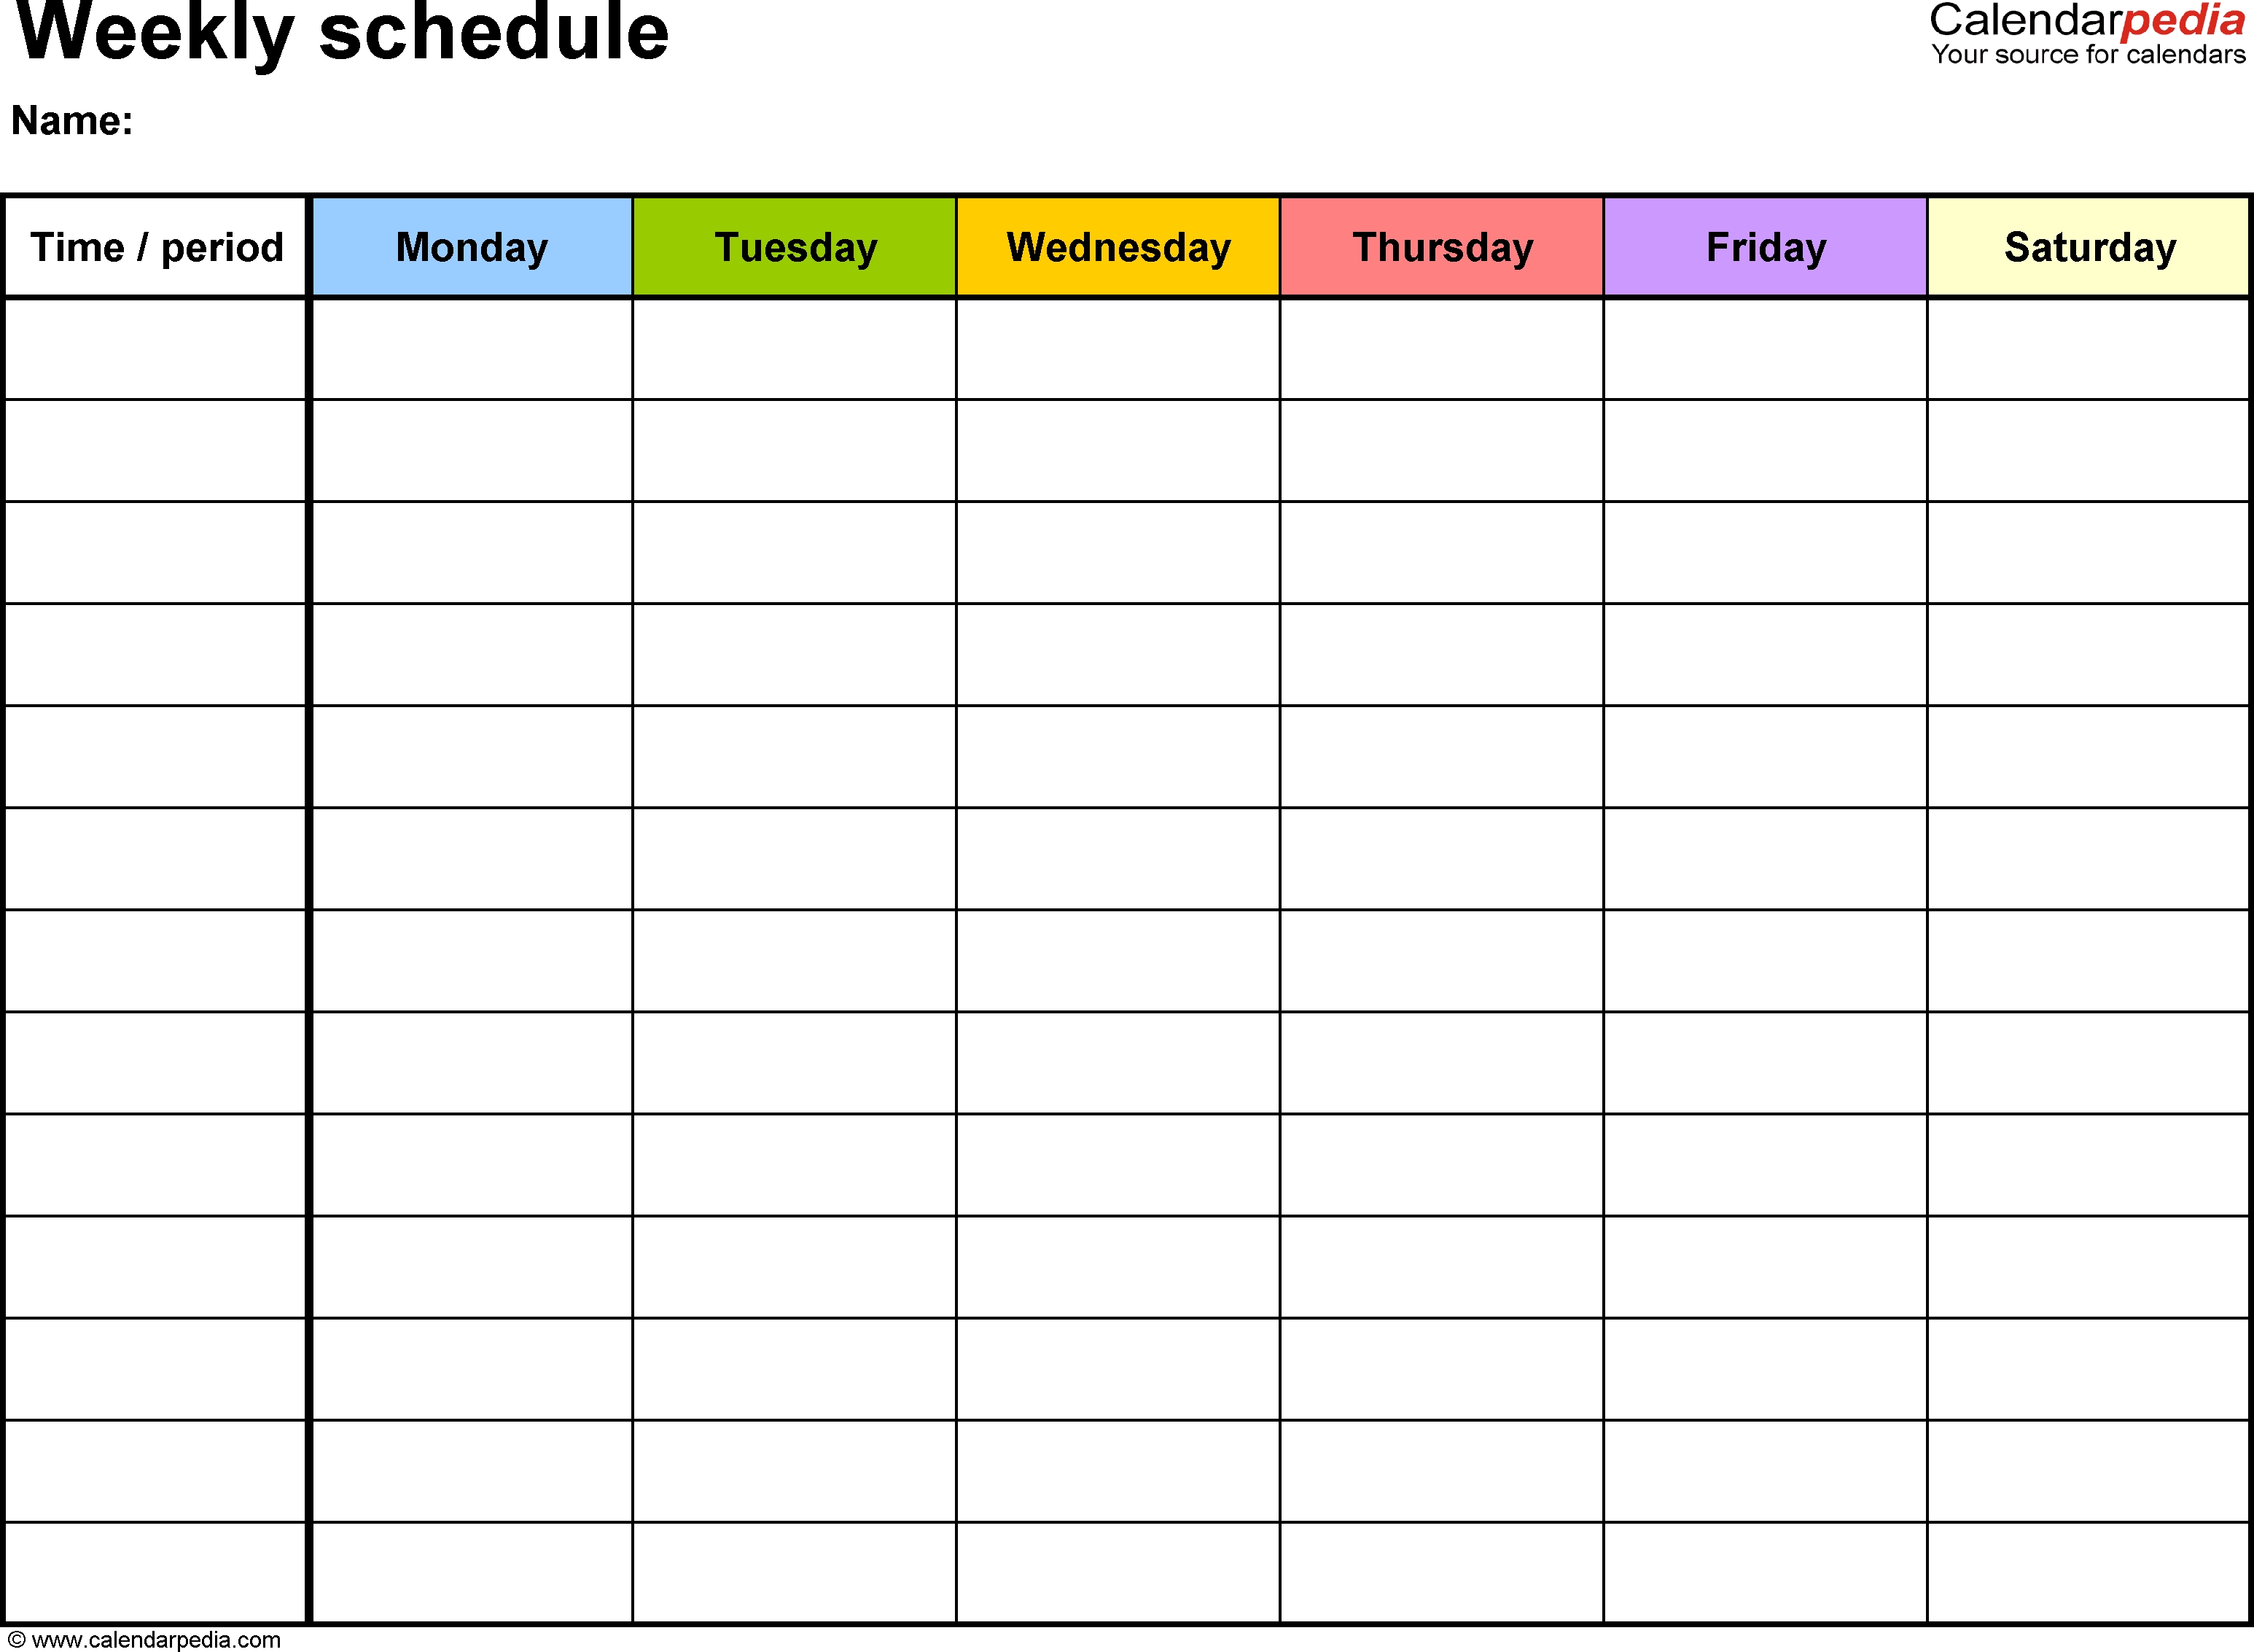 Free Weekly Schedule Templates For Word - 18 Templates in 5 Day Weekly Calendar Template